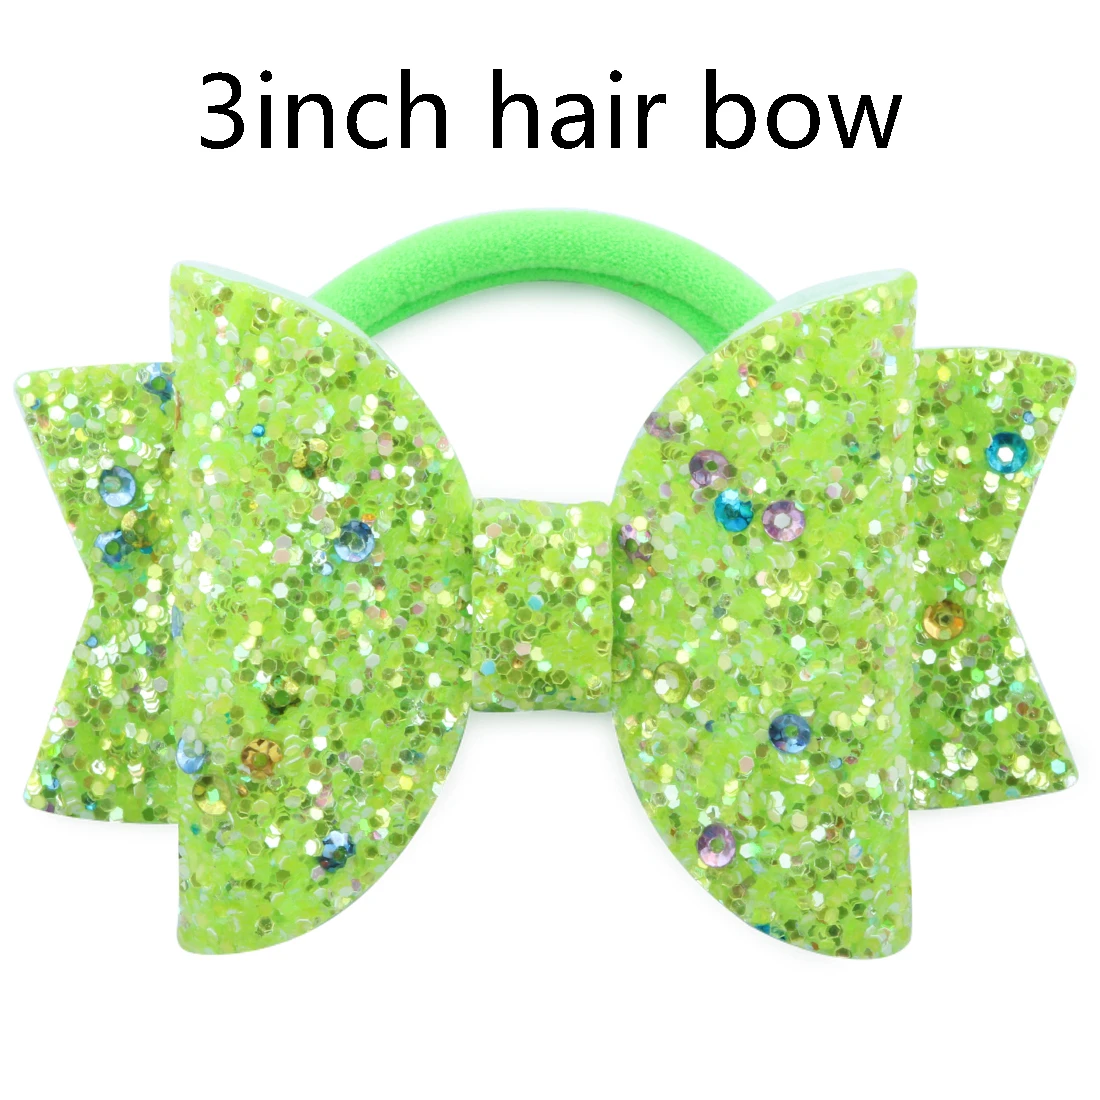 1 PC Child Hair Bow Tie Elastic Hair Band Glitter Hairbow Rope Rainbow Sequin Sparkly 3 Inch Bows Mermaid Girls Sweet Headwear - Цвет: 3inch sequin bow-7